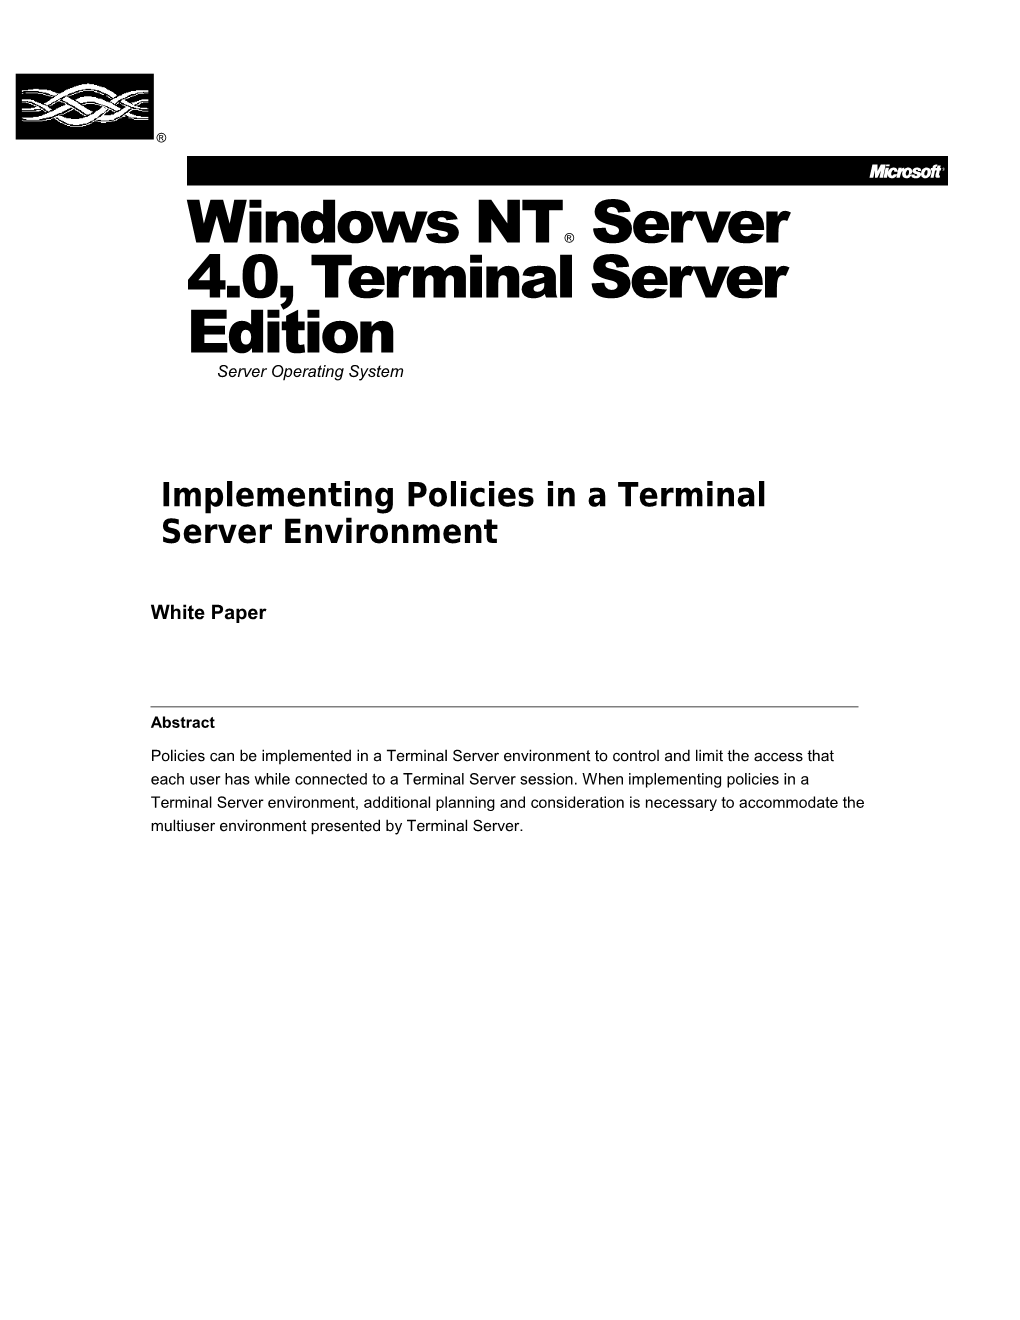 Implementing Policies in a Terminal Server Environment